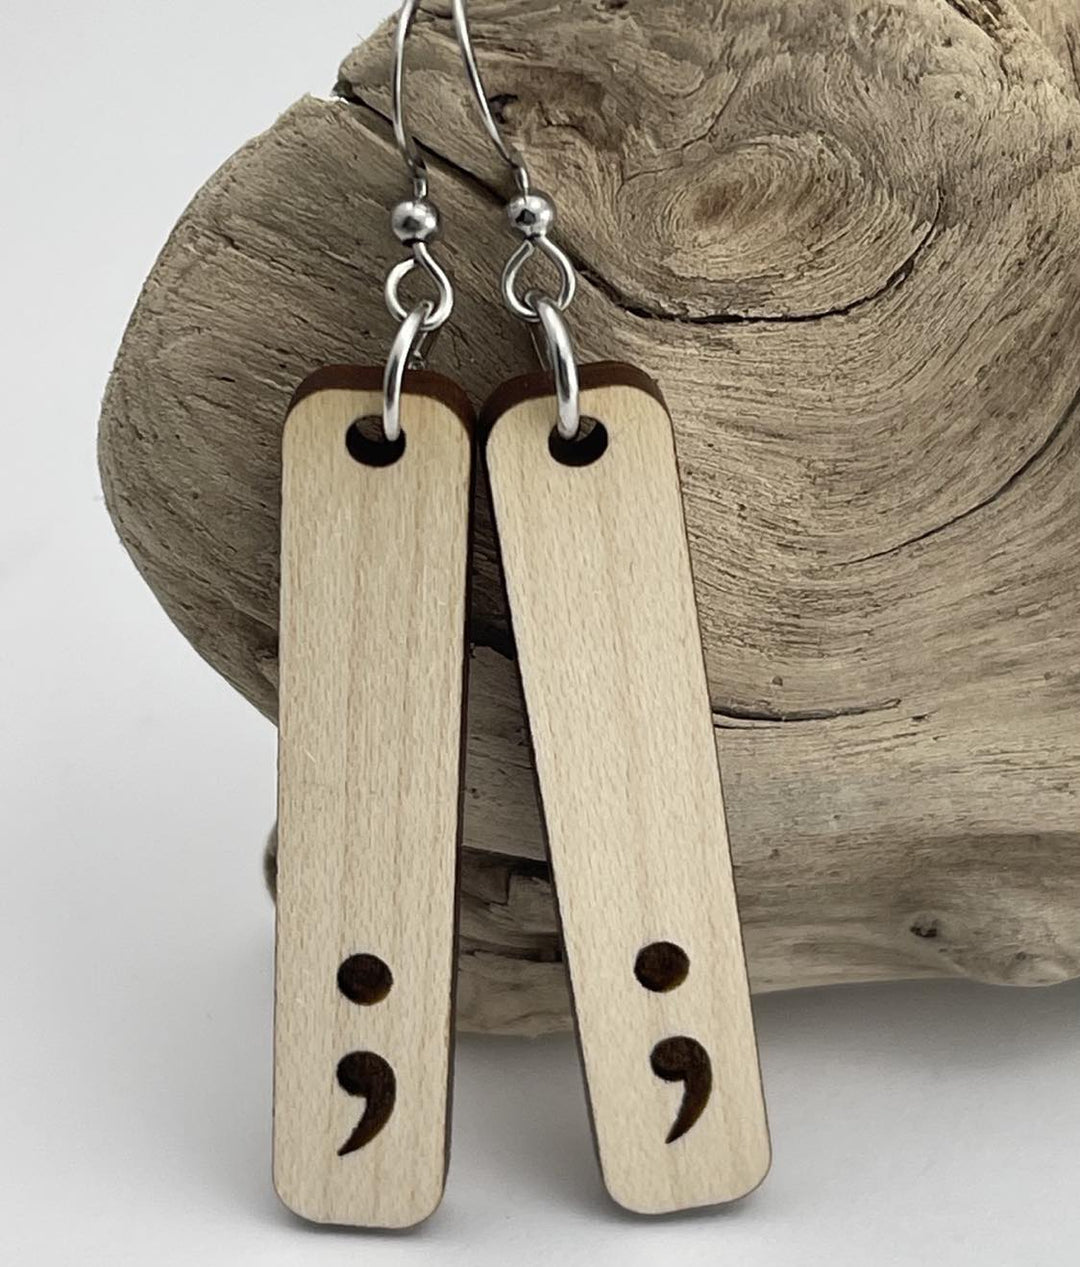 Semicolon Wooden Earrings - Be Inspired UP